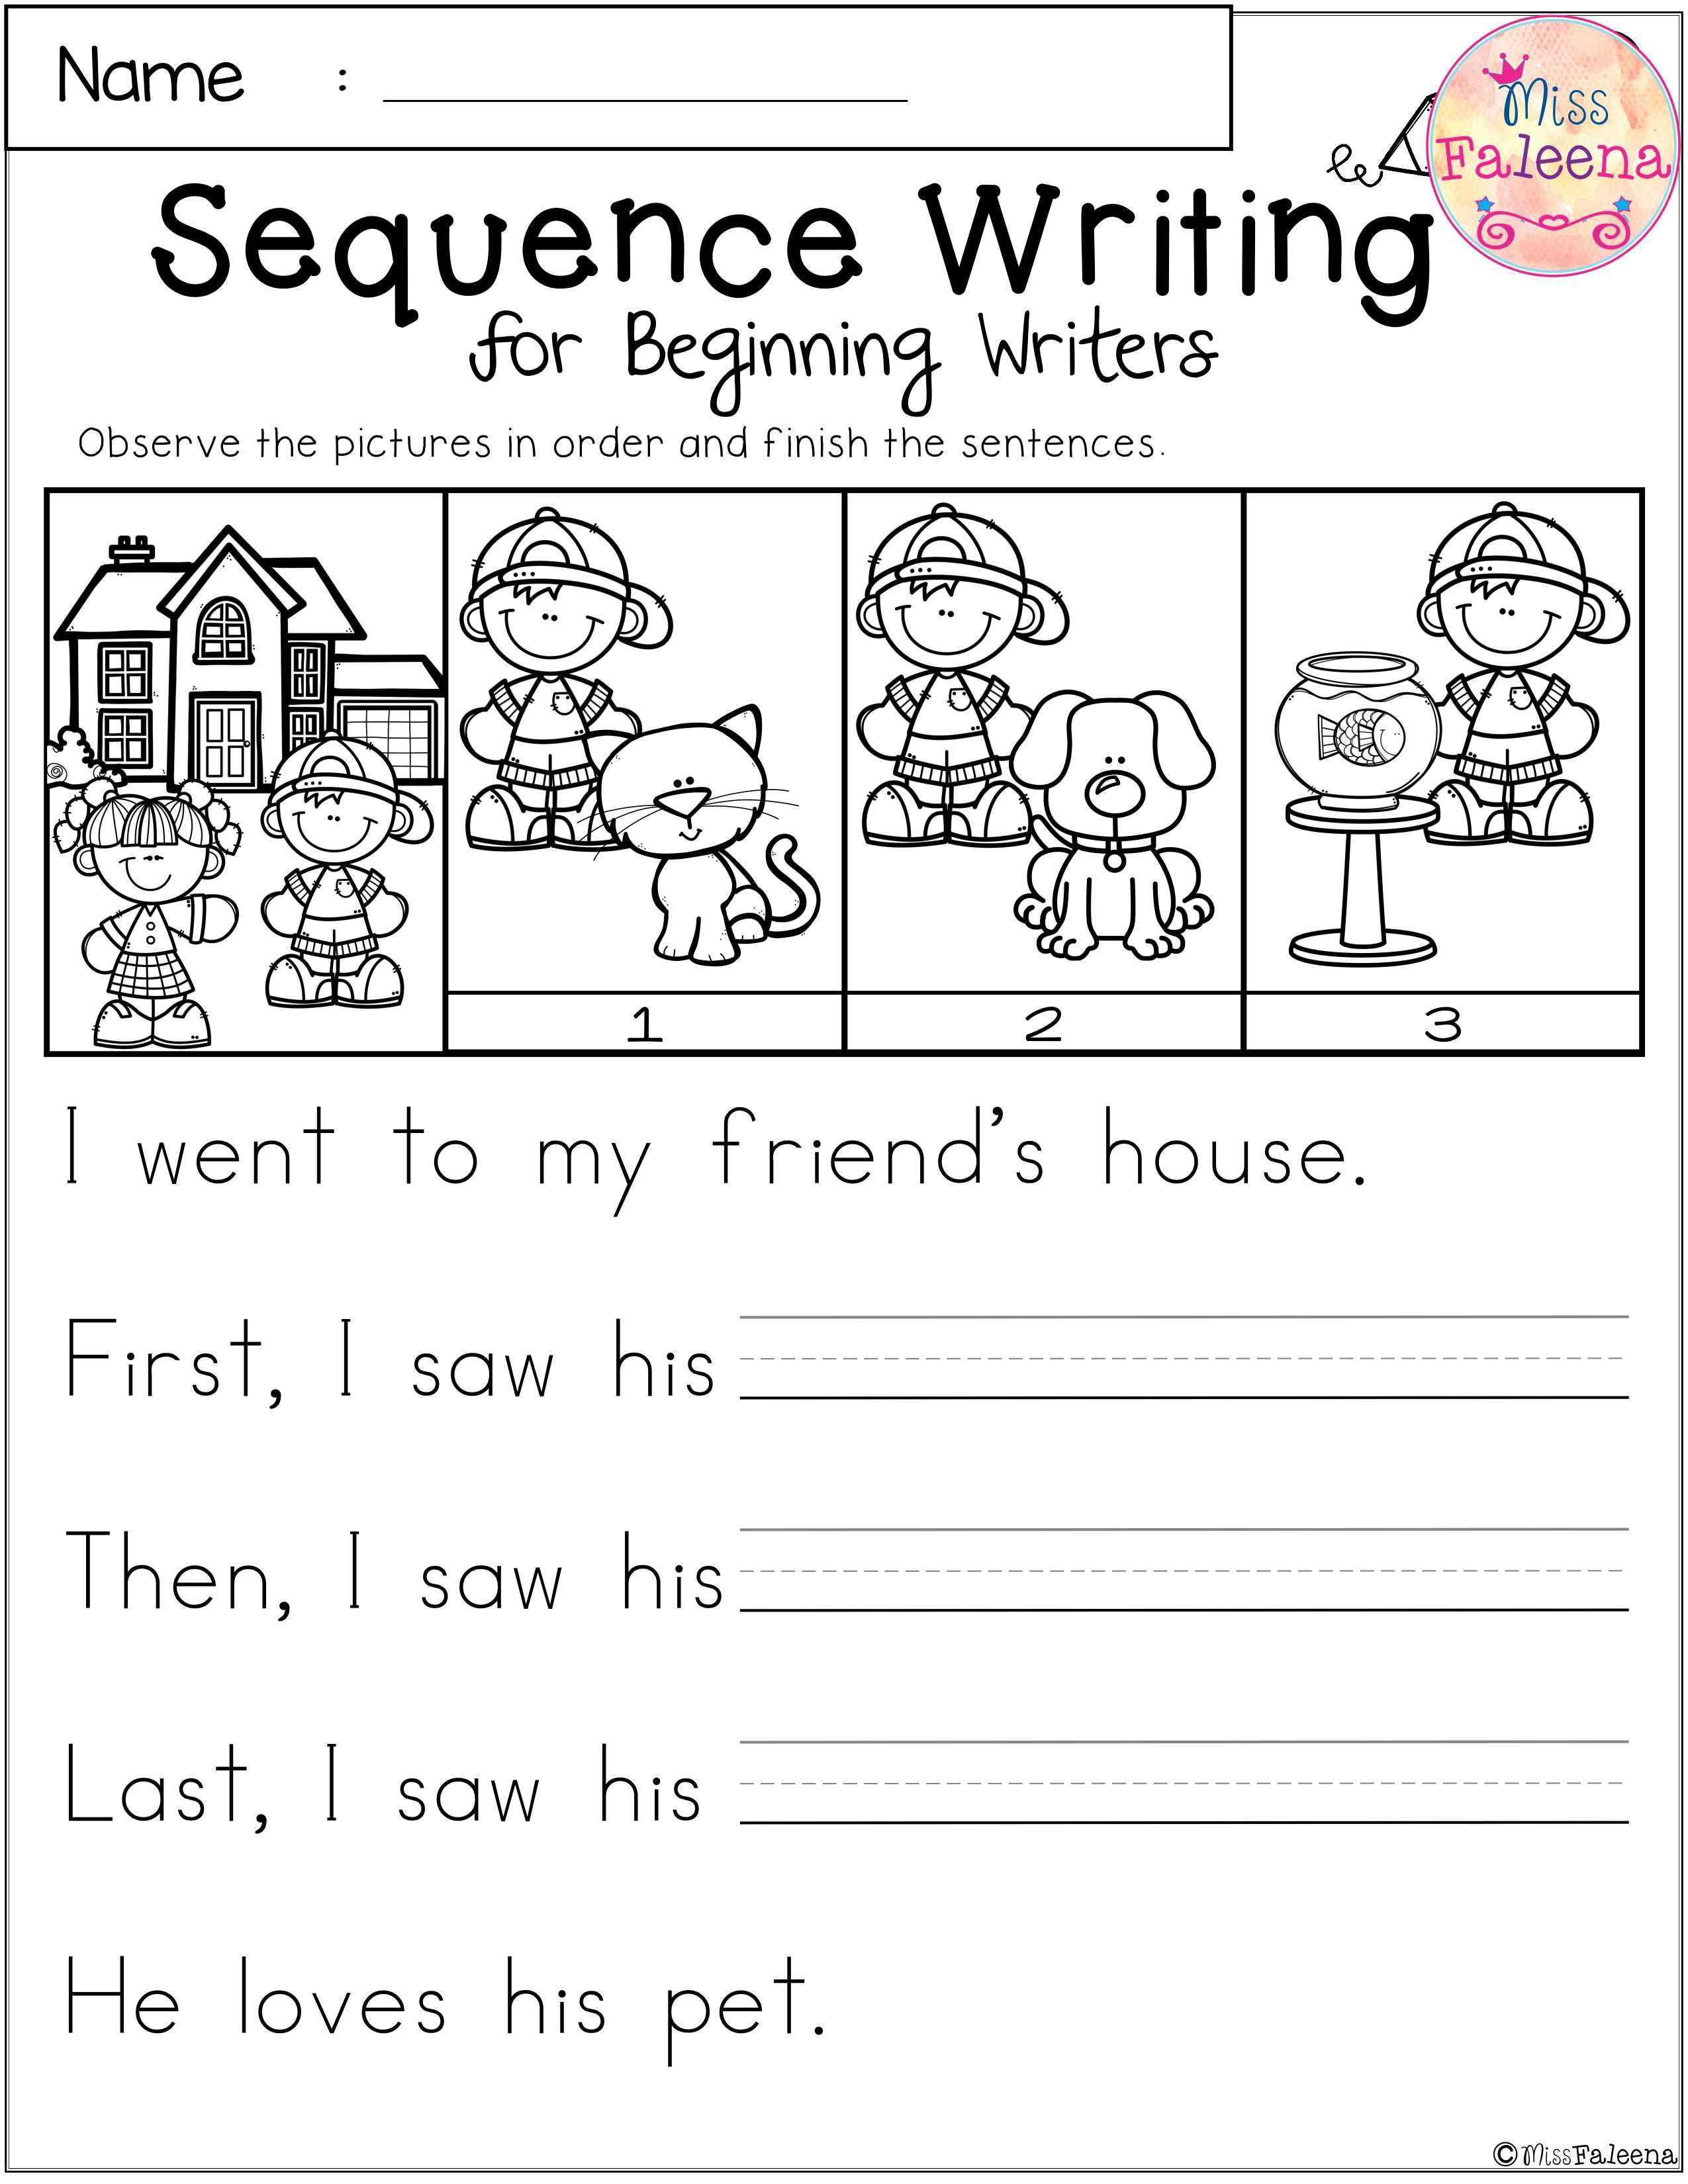 Story Sequence Worksheets for Kindergarten Free Sequence Writing for Beginning Writers with Images